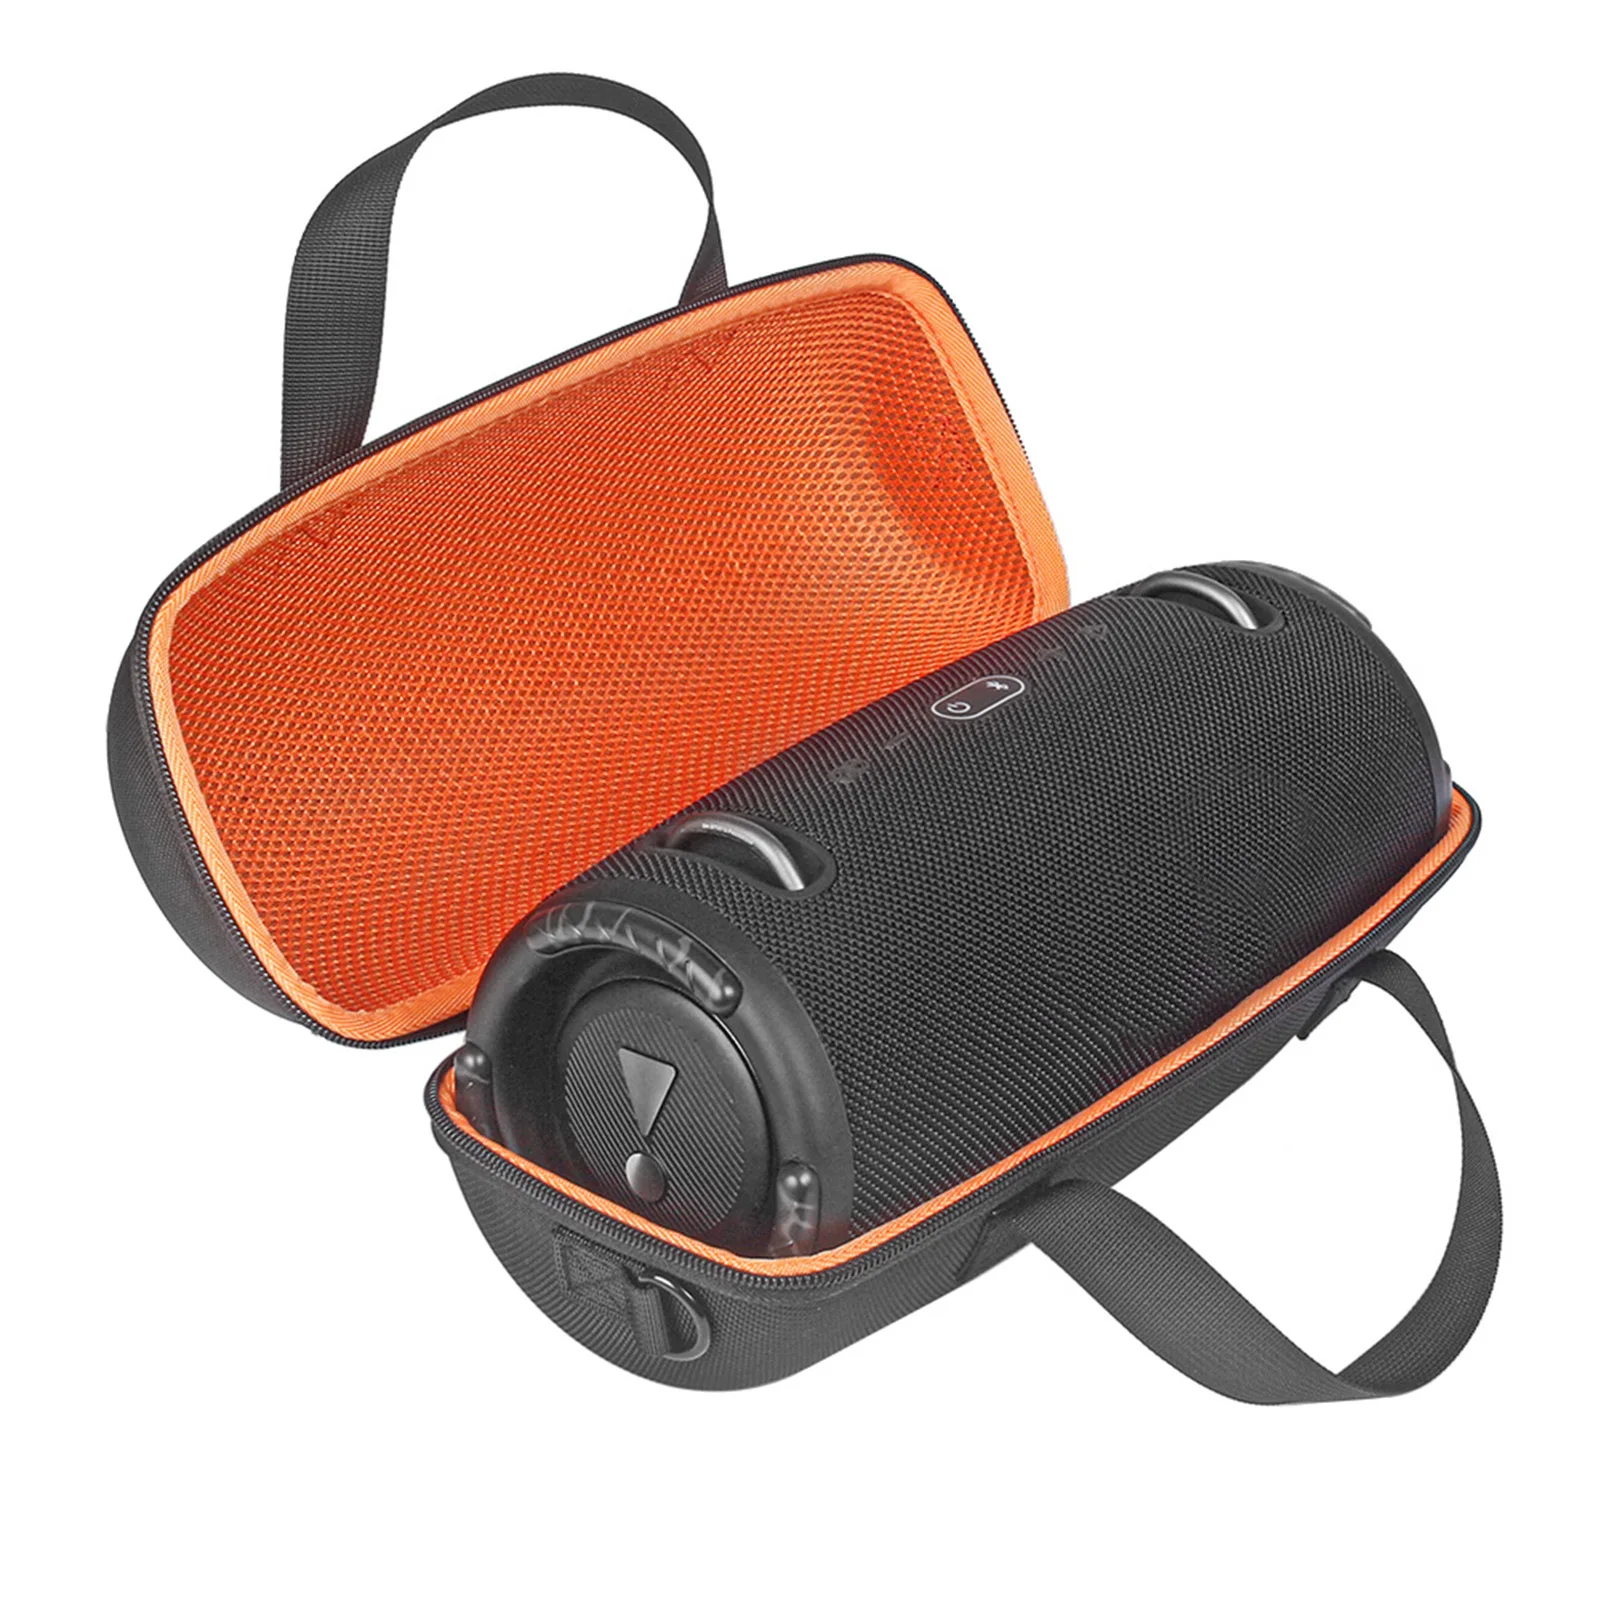 2021 New Portable Protective Case EVA Hard Travel Bags Carry Storage Box For JBL Xtreme 3 Bluetooth Speaker Pouch